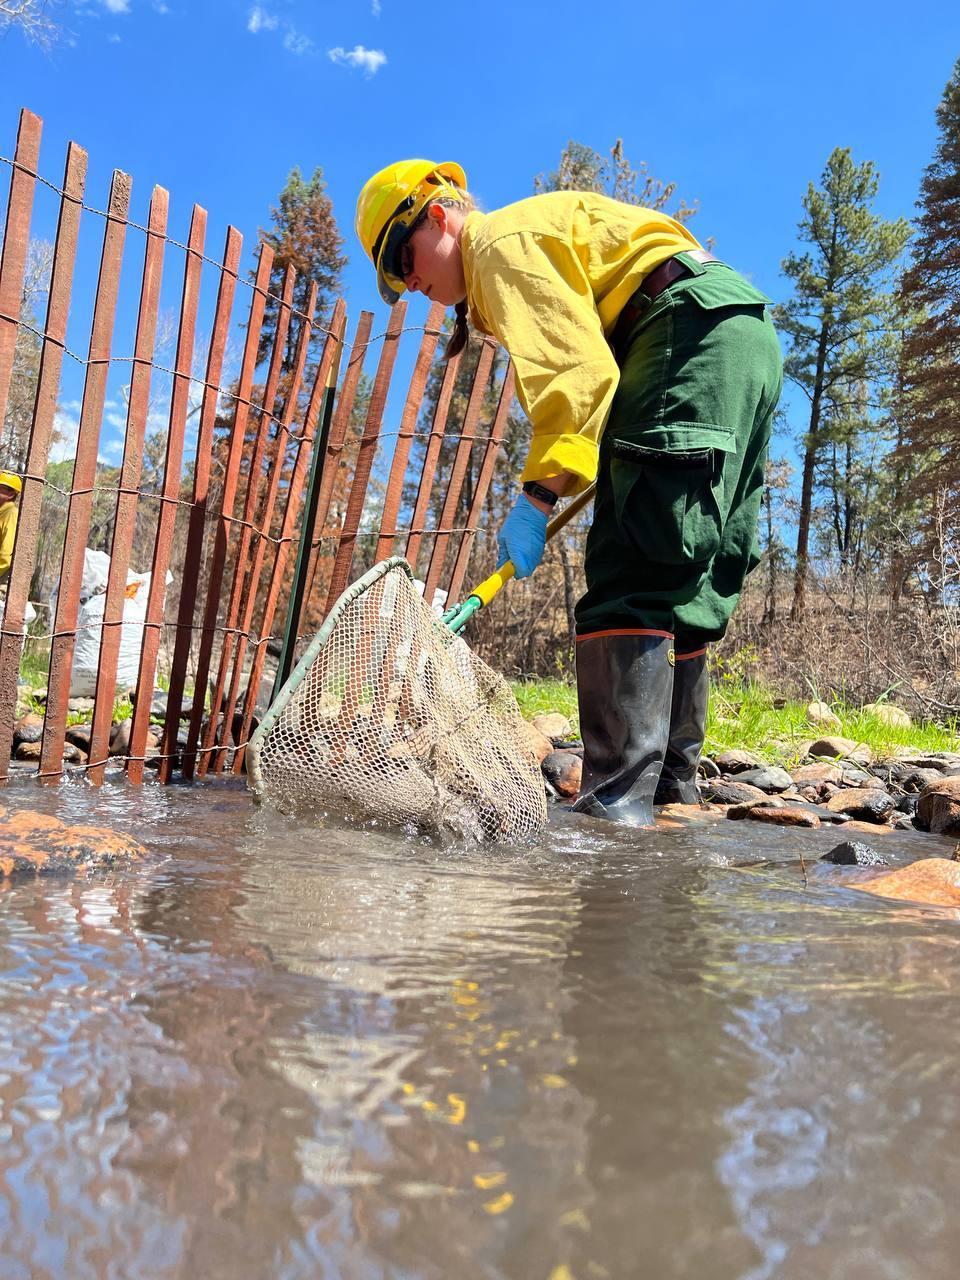 A female wearing a yellow shirt, green pants, yellow hardhat, and black shin high rubber boots stands in a creek filled with running water. Female is using a net on a long pole to scoop debris out of the water and put in plastic bag on creek bank.